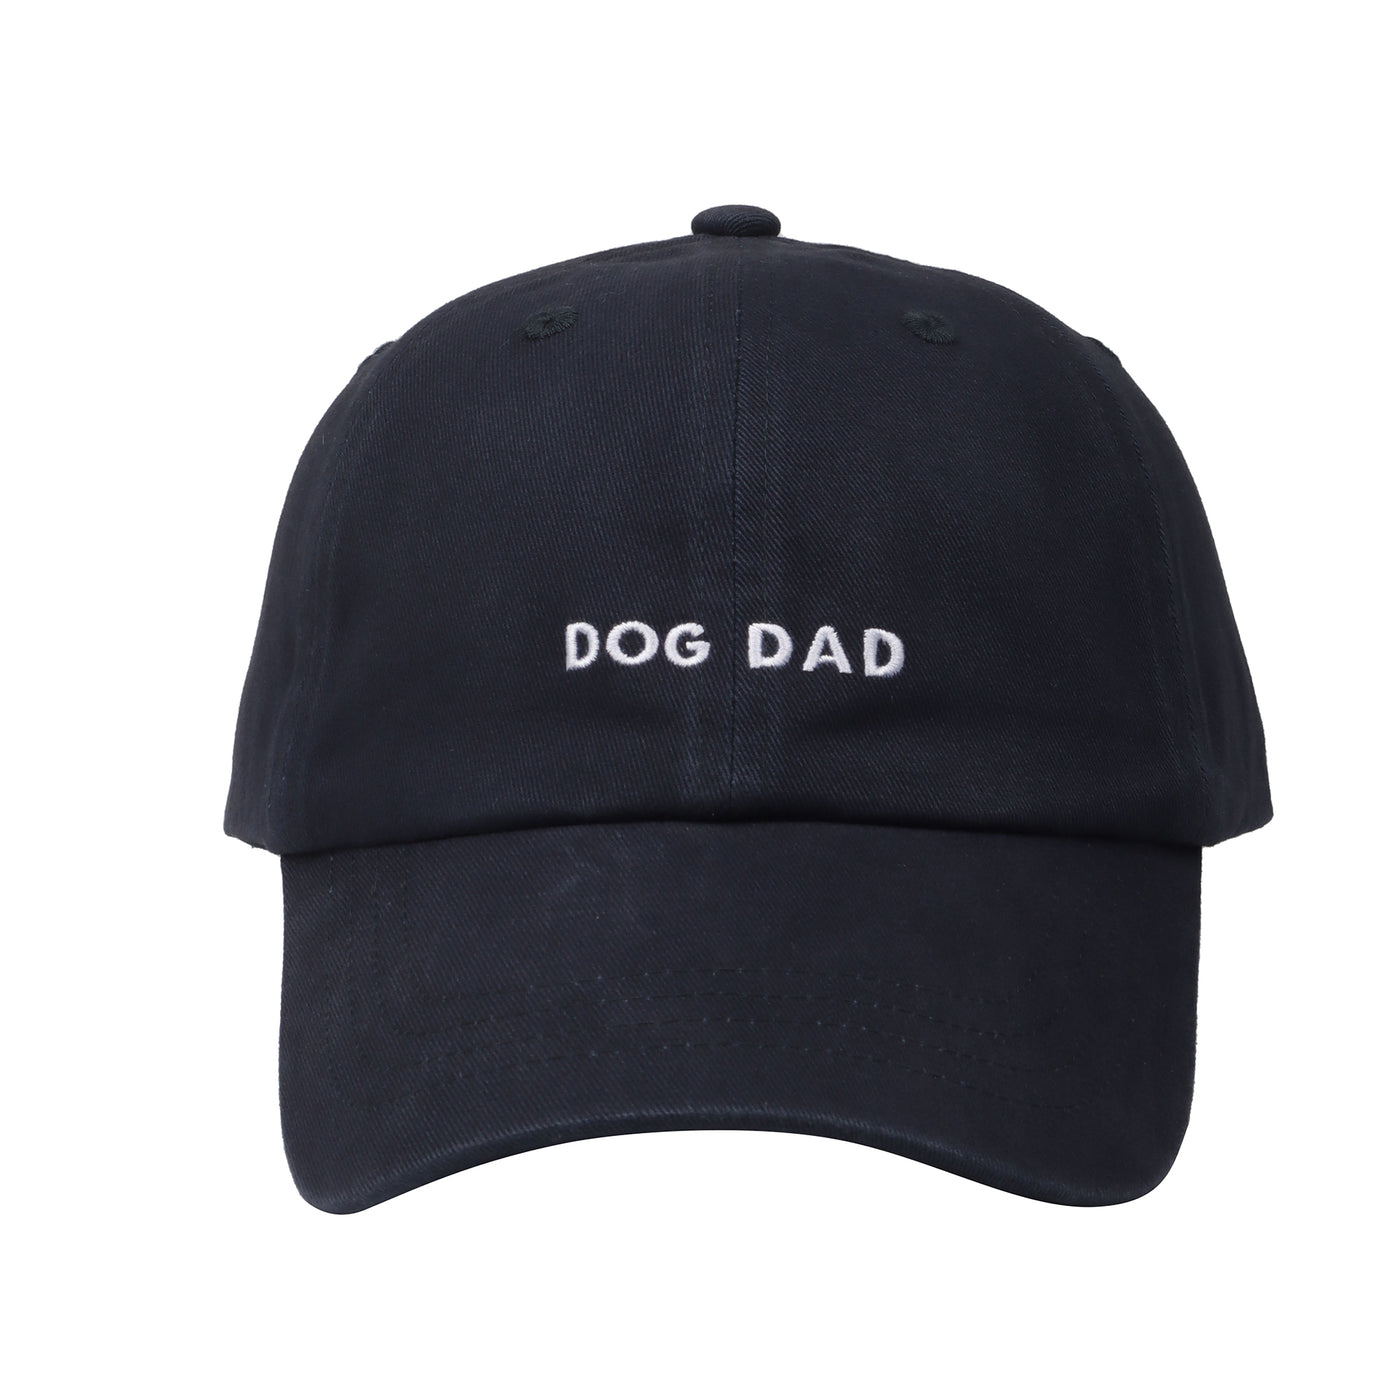 Hatphile Dog Dad Hats Embroidered Text Adjustable Fit 100% Cotton Baseball Cap